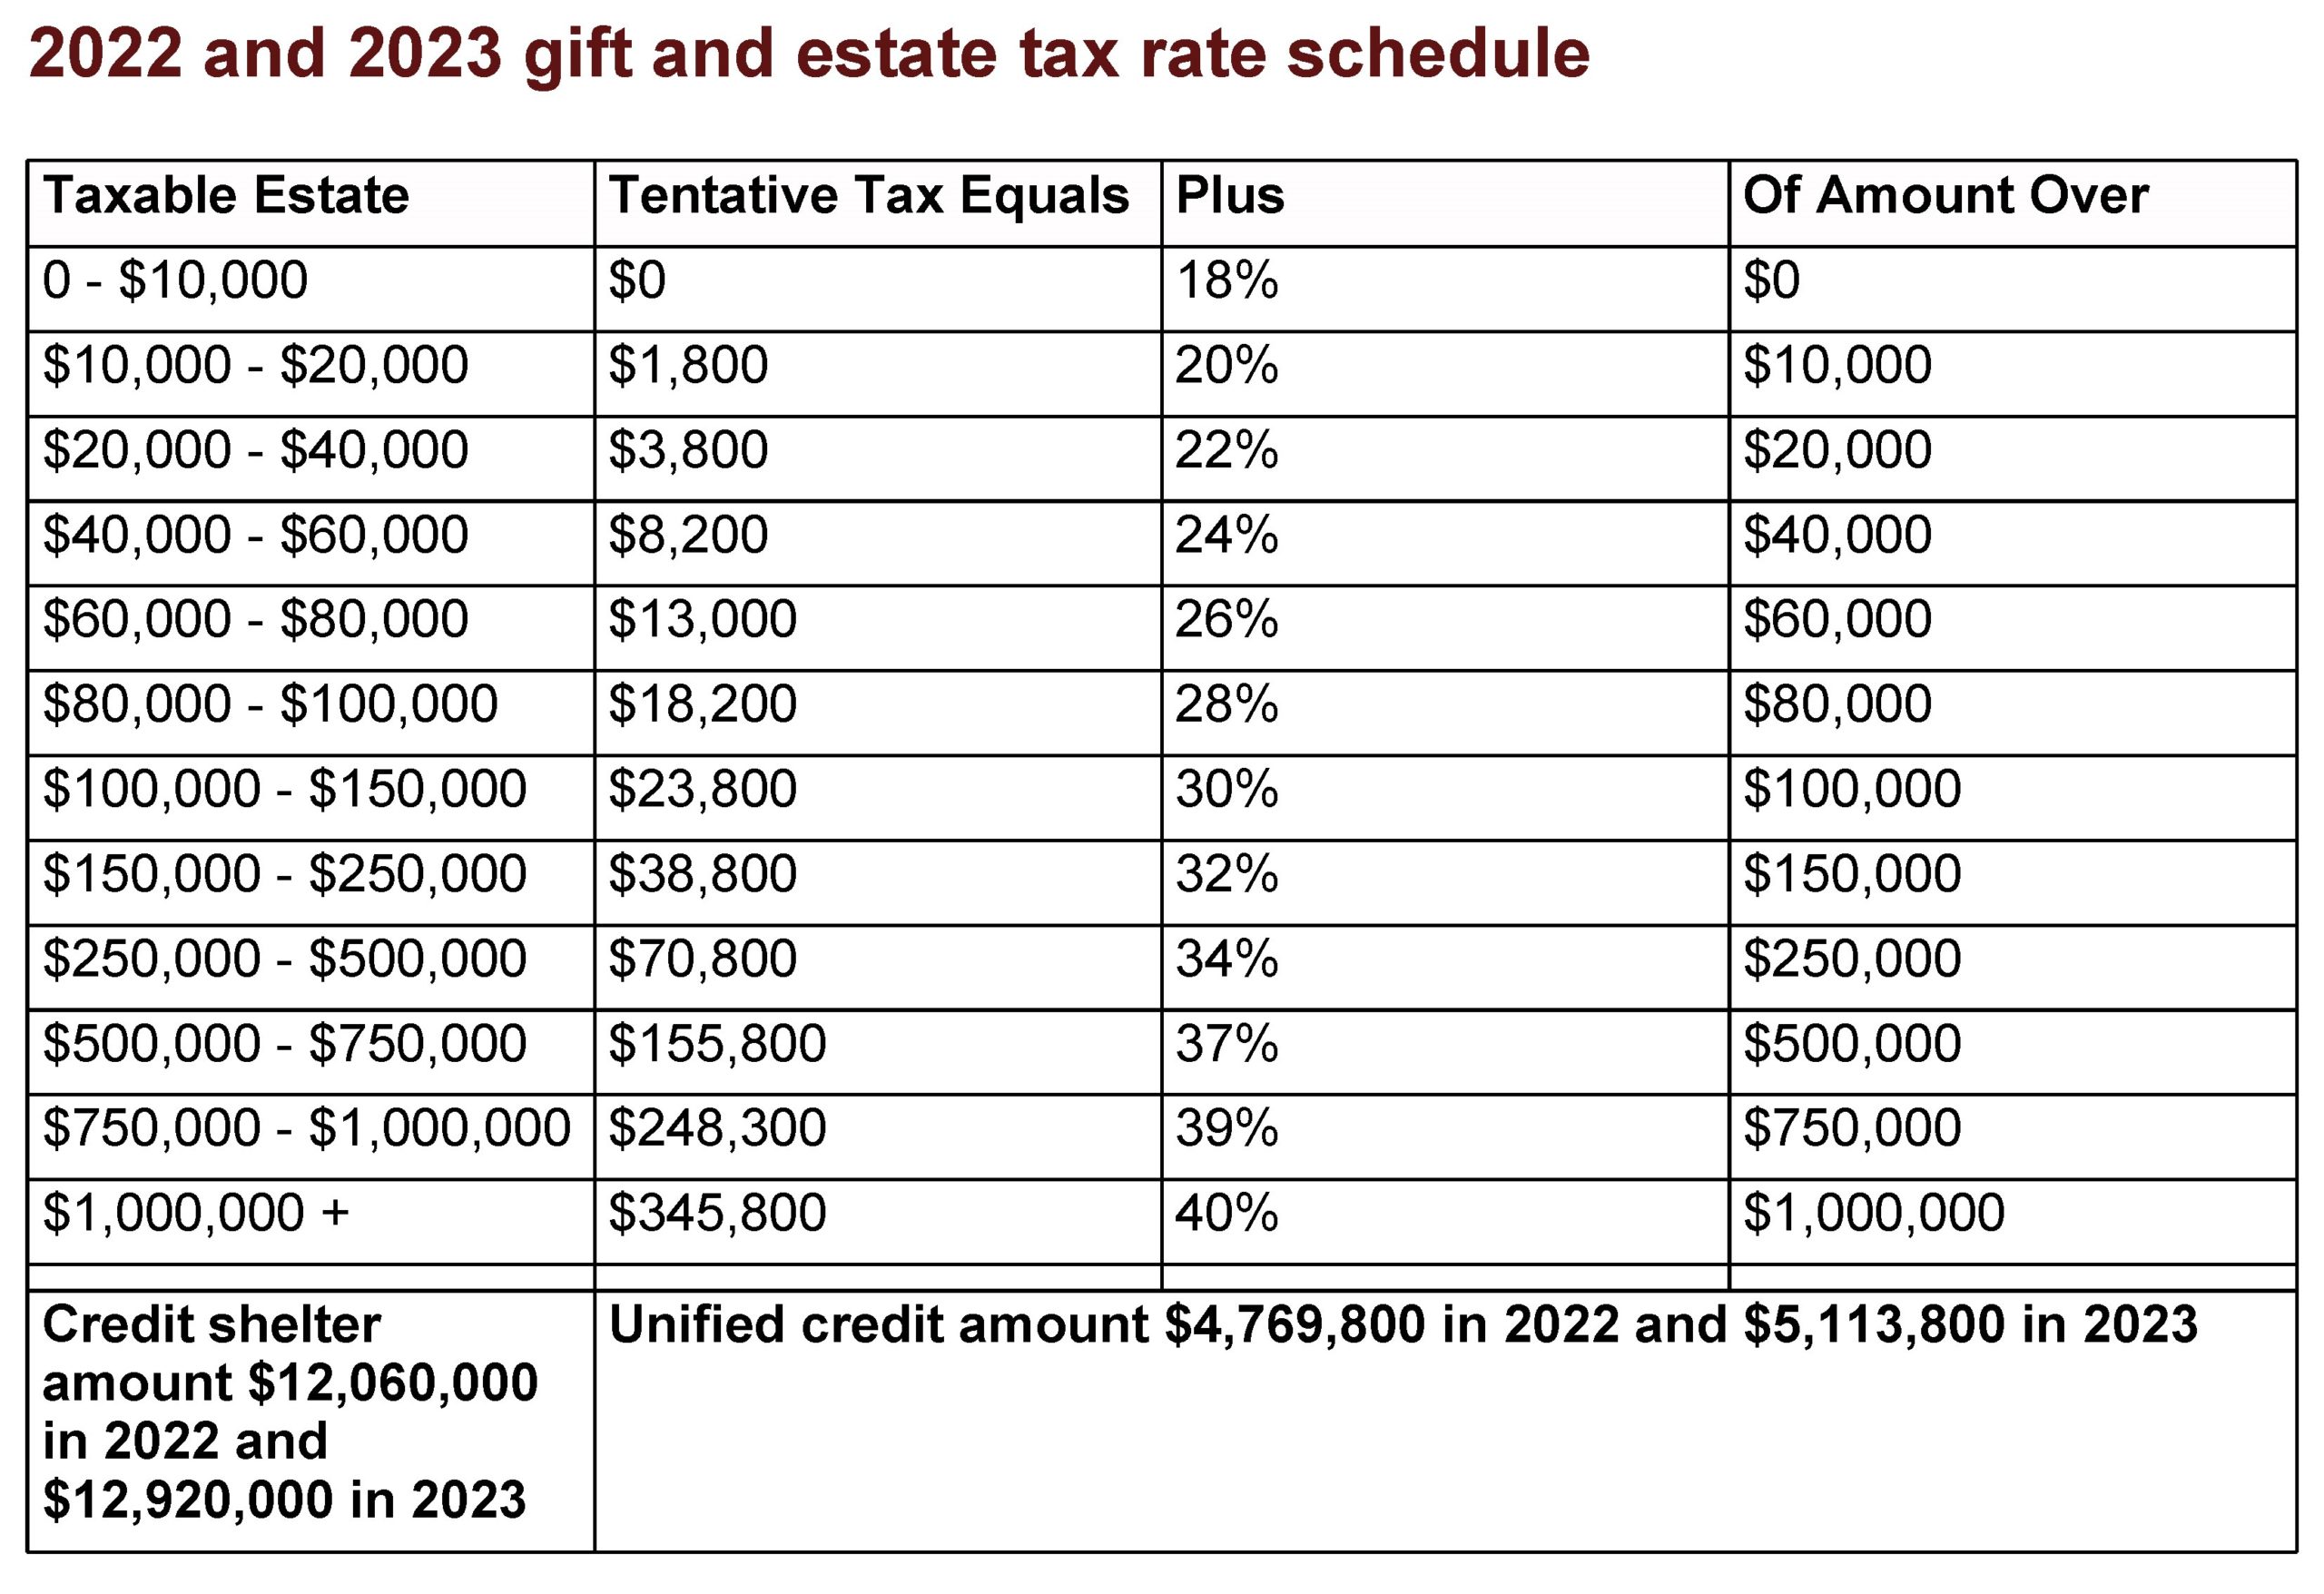 2022 And 2023 Gift and Estate Tax Rate Schedule